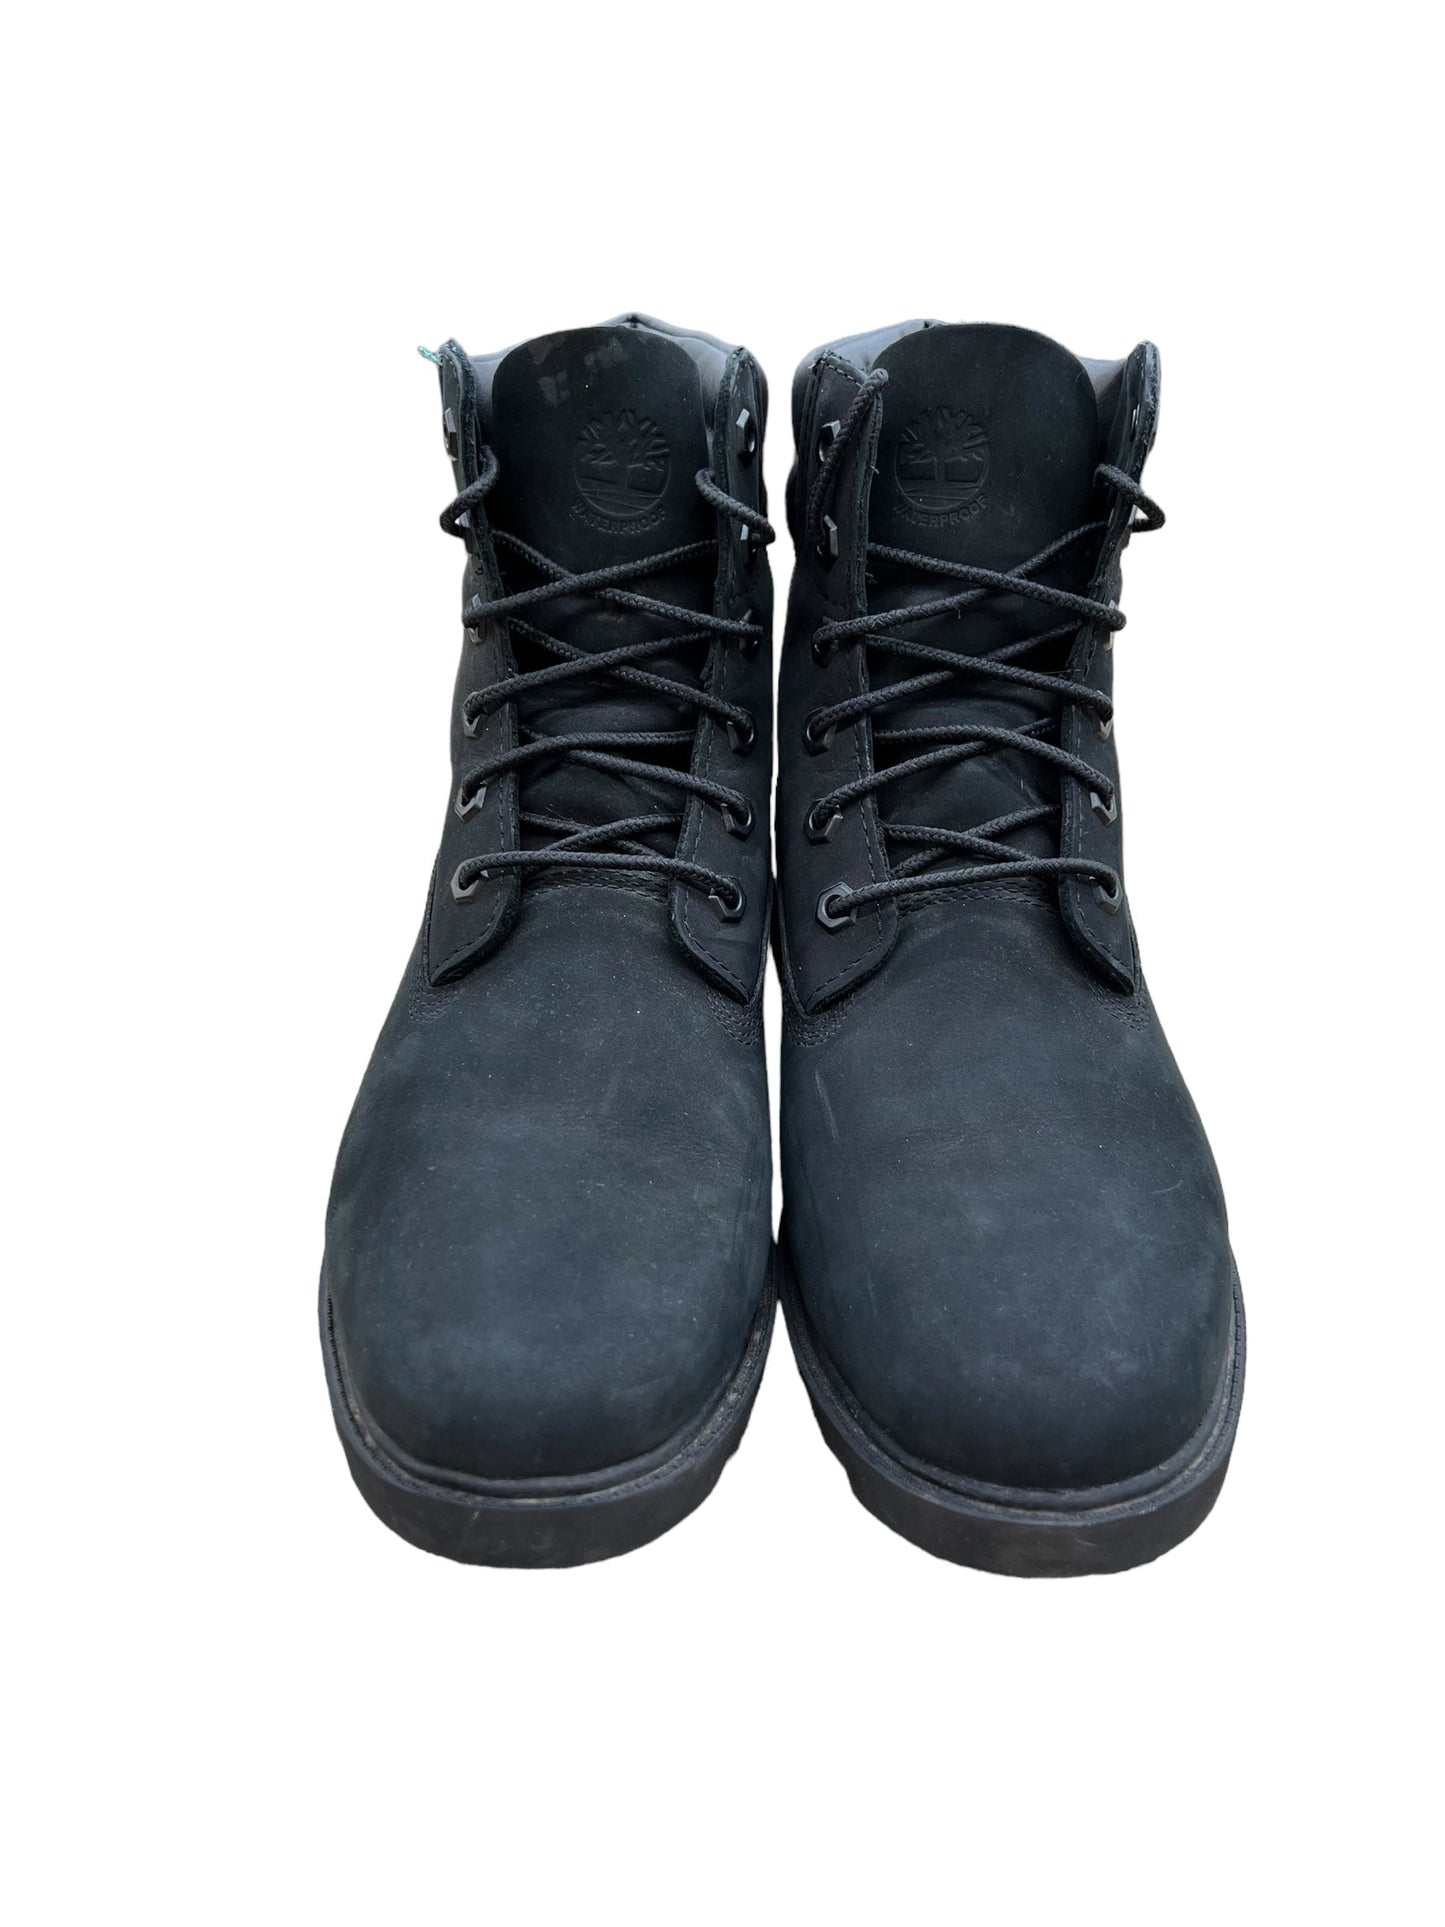 Boots Hiking By Timberland  Size: 9